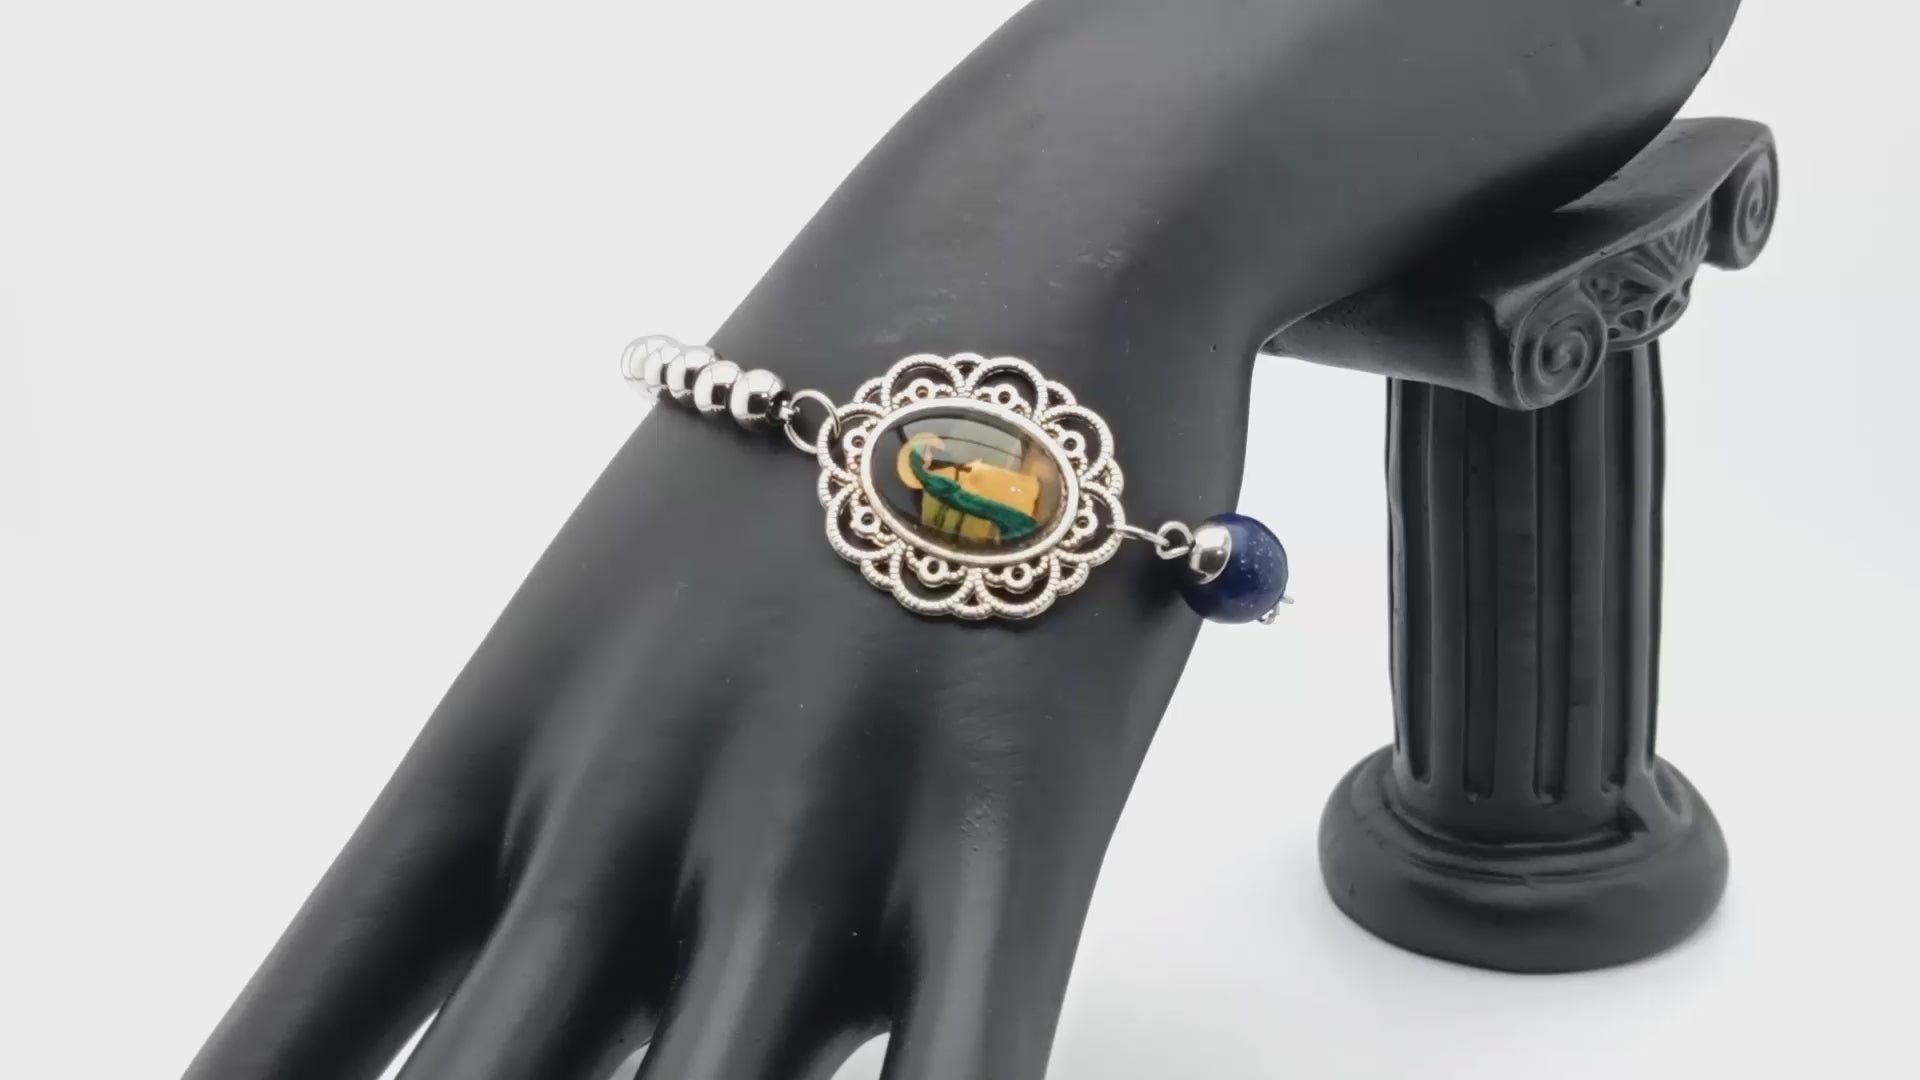 The Virgin Mary unique rosary beads single decade rosary bracelet with stainless steel and lapis lazuli beads and large picture medal. centre.